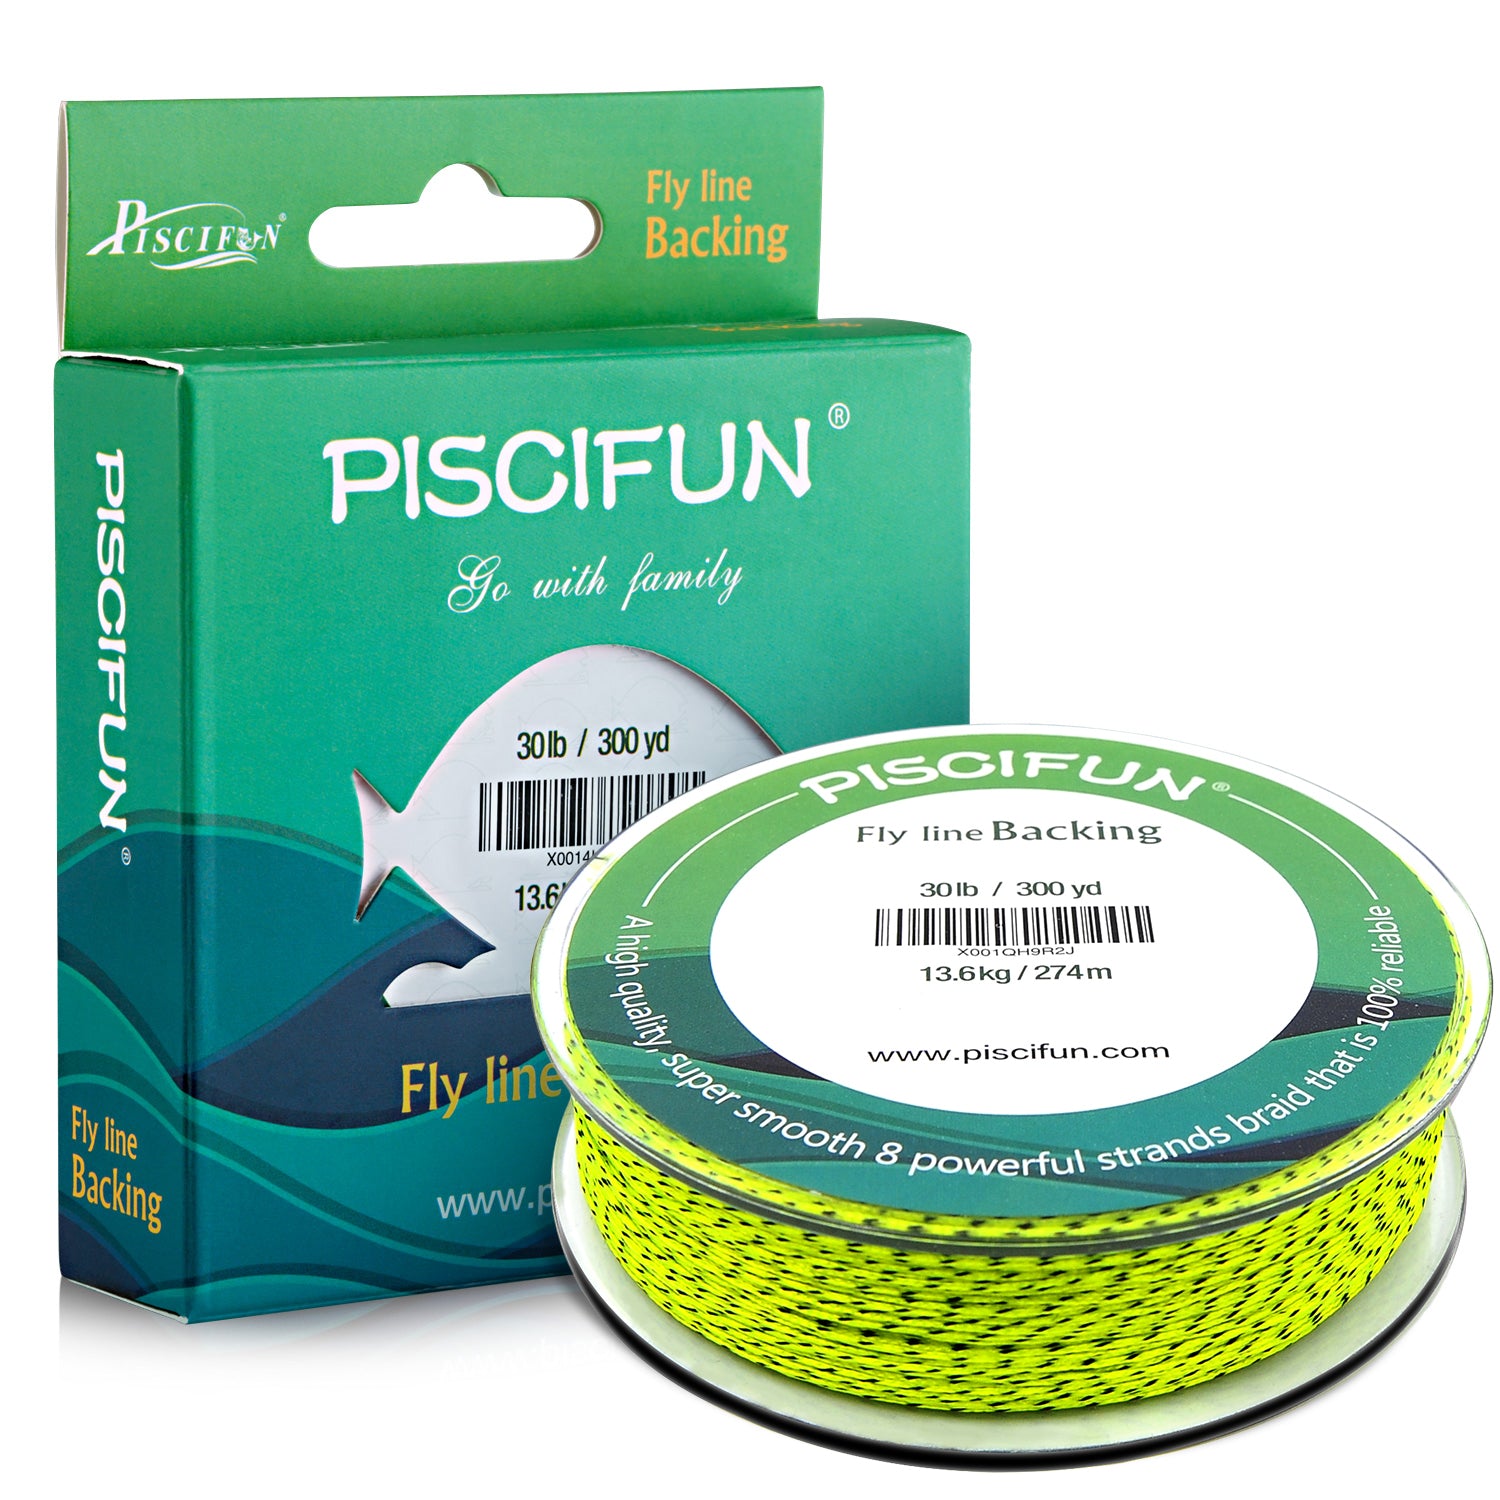 Piscifun Fly Line Backing, Braided Fly Backing Line with Orange, White,  Fluorescent Yellow Color, 20lb, 30lb,100yd, 300yd Fluorescent Yellow/Black  20lb/100yd